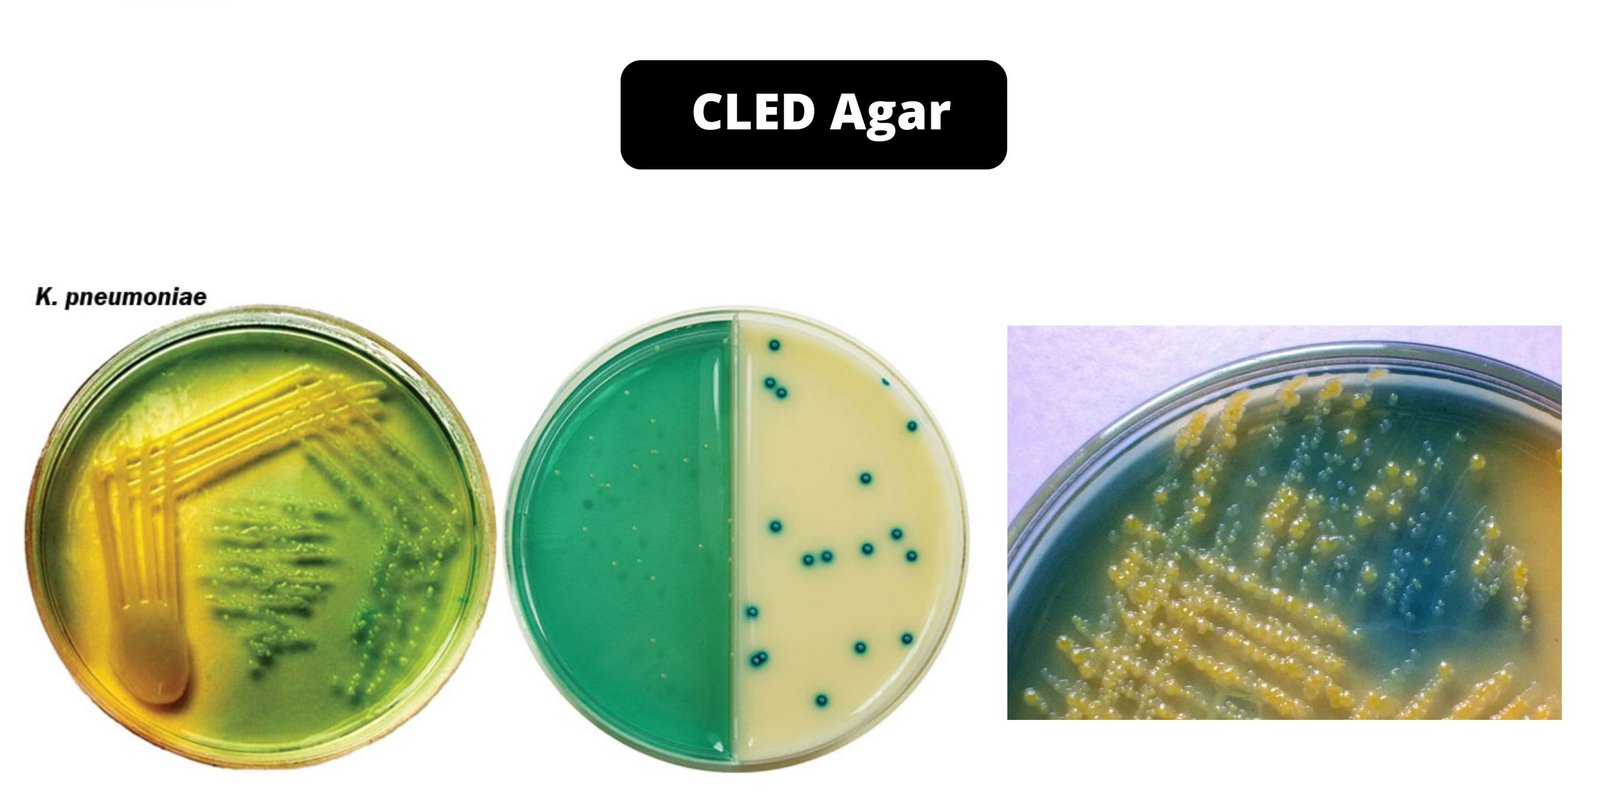 CLED Agar - Composition, Principle, Preparation, Results, Uses